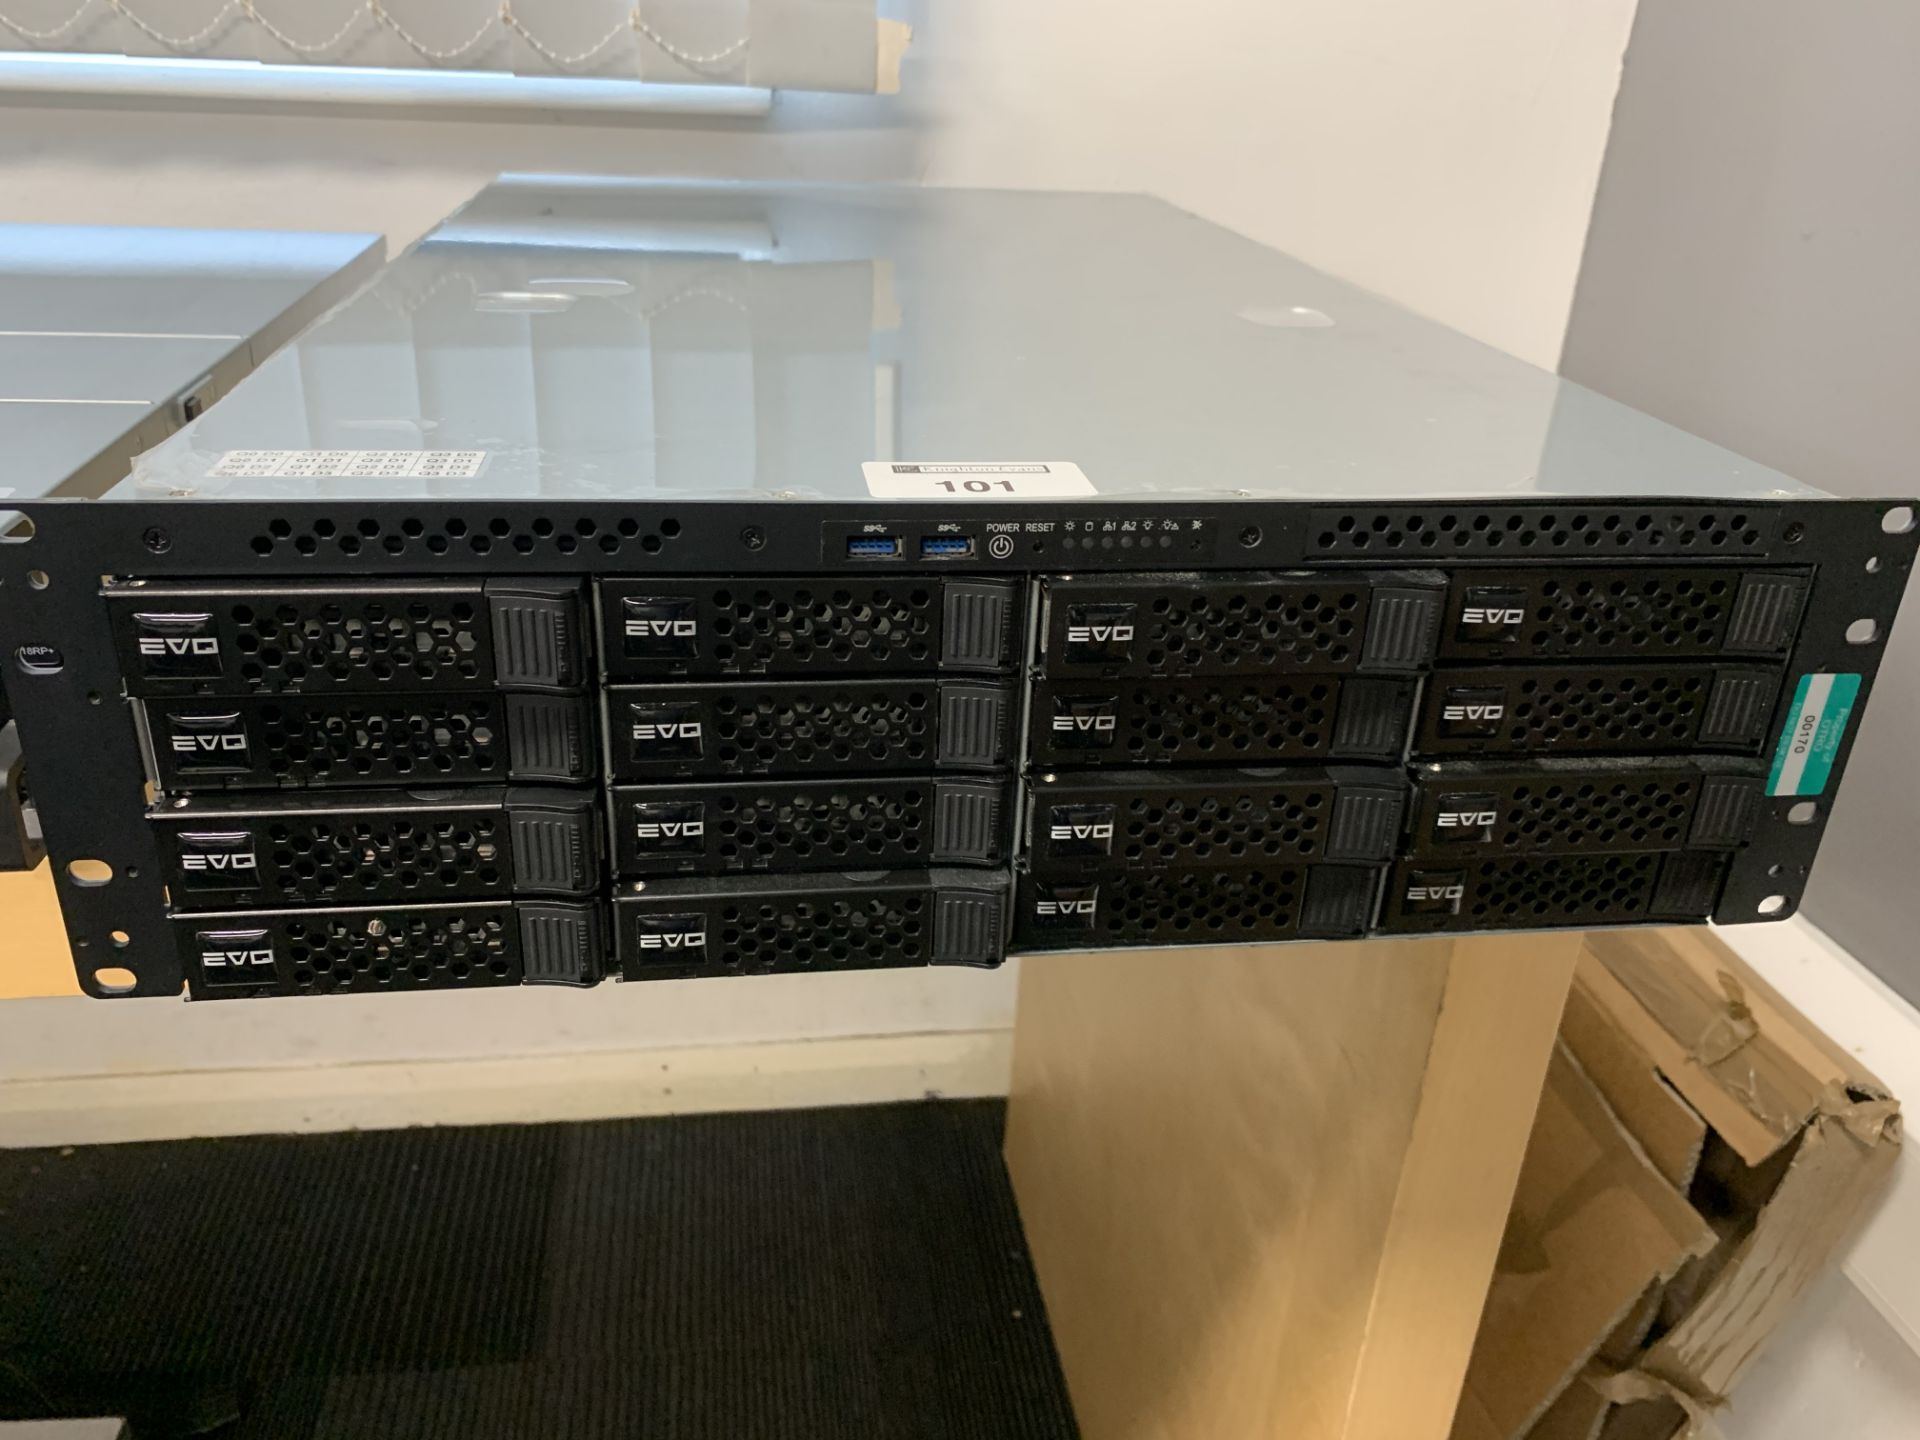 Studio Network Solutions Stack Storage 8 x Micron 5200 PRO 2.5 SSD 8 x HGST 4TB - Image 4 of 7